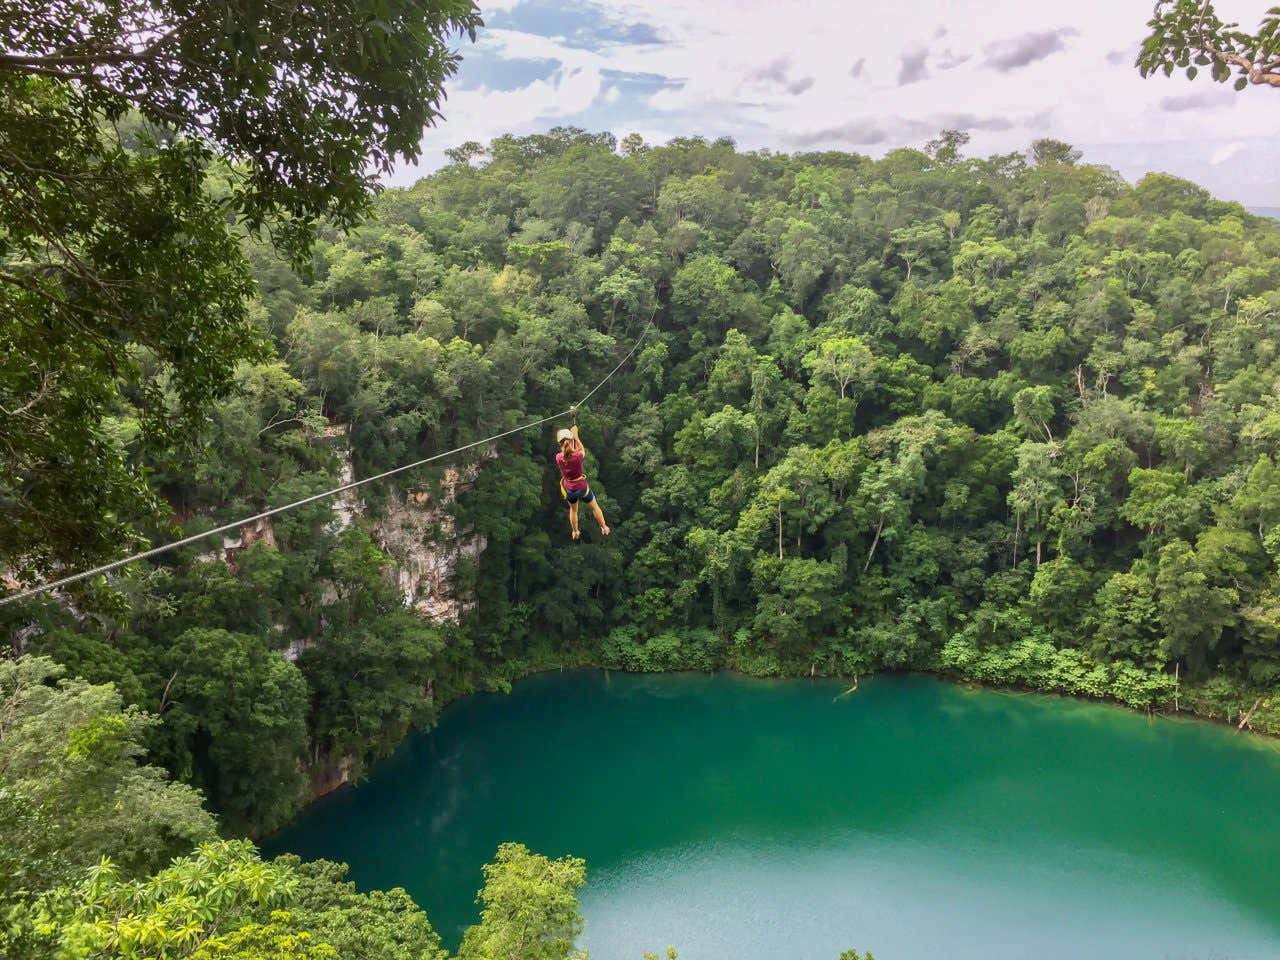 Woman ziplining over a cenote surrounded by lush foliage in the Mexican jungle